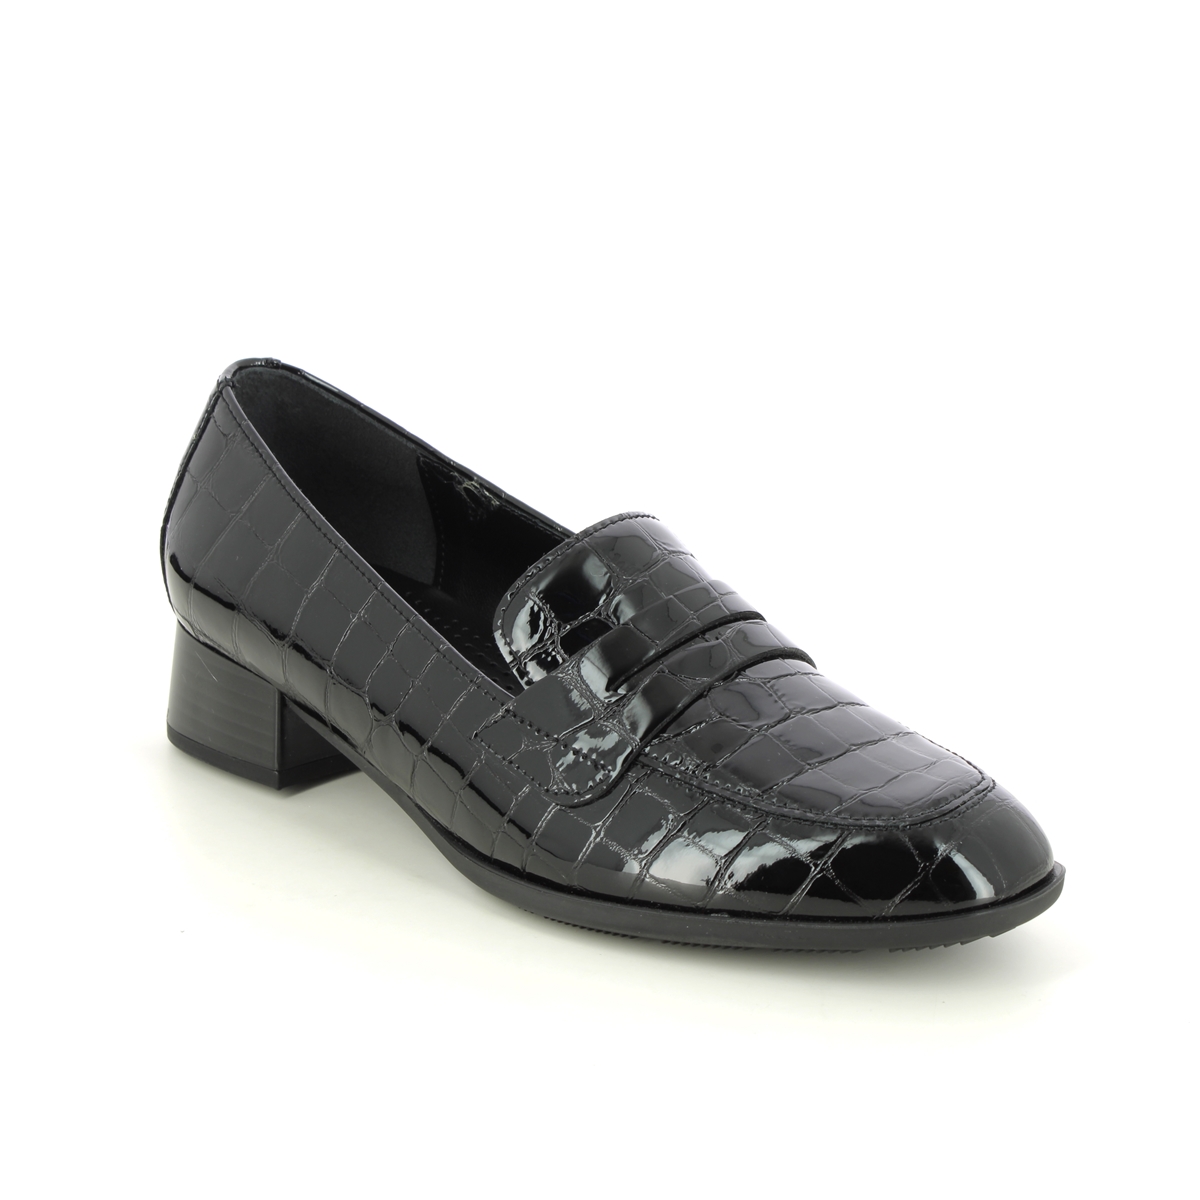 Gabor Right Penny Black Croc Womens Loafers 35.280.97 In Size 3 In Plain Black Croc Effect  Womens Loafers In Soft Black Croc Effect Leather